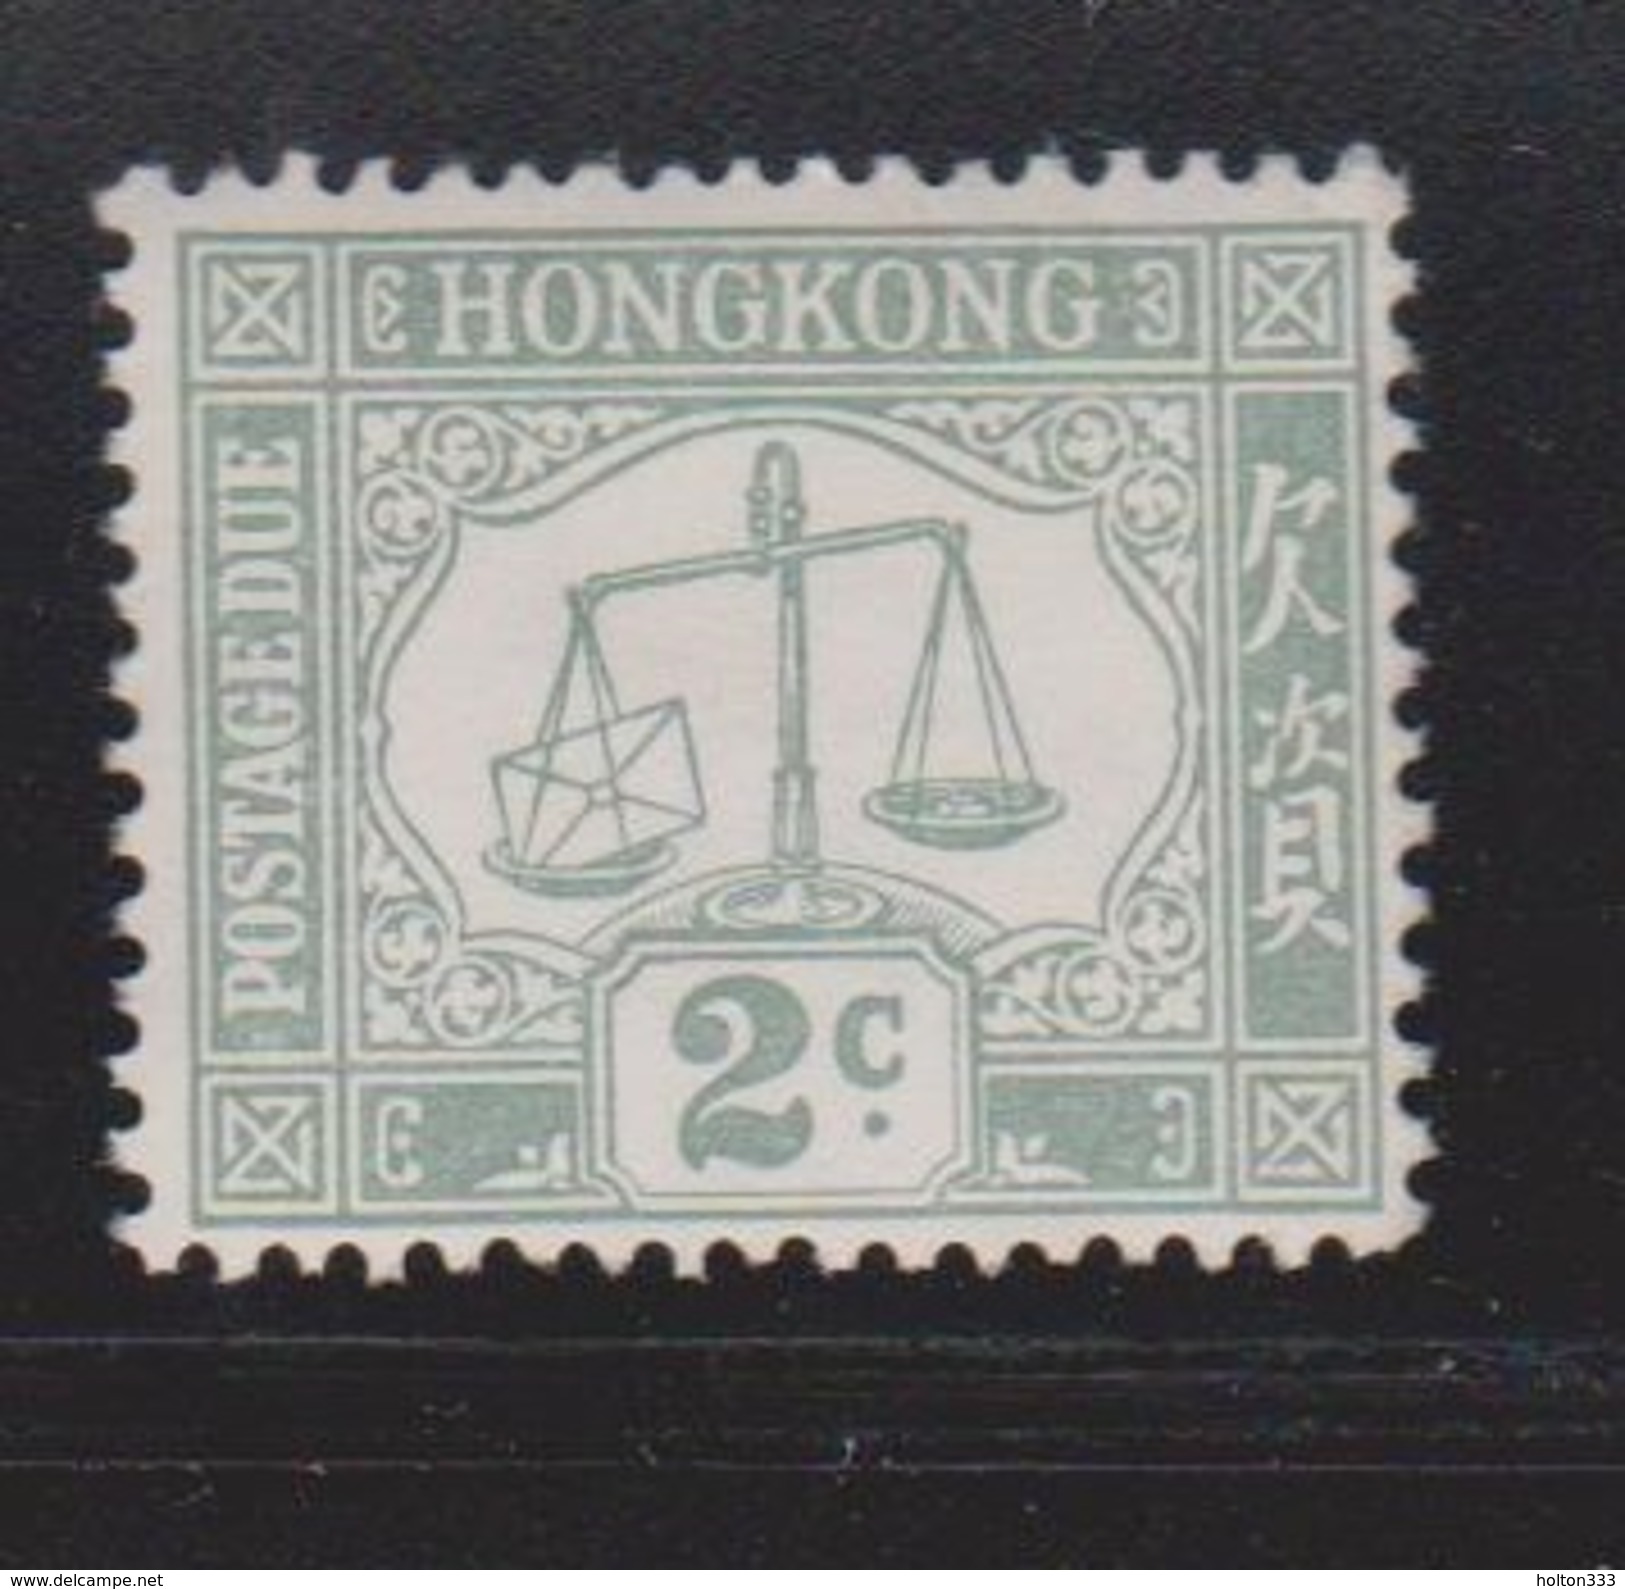 HONG KONG Scott # J6 MH - Postage Due - Unused Stamps